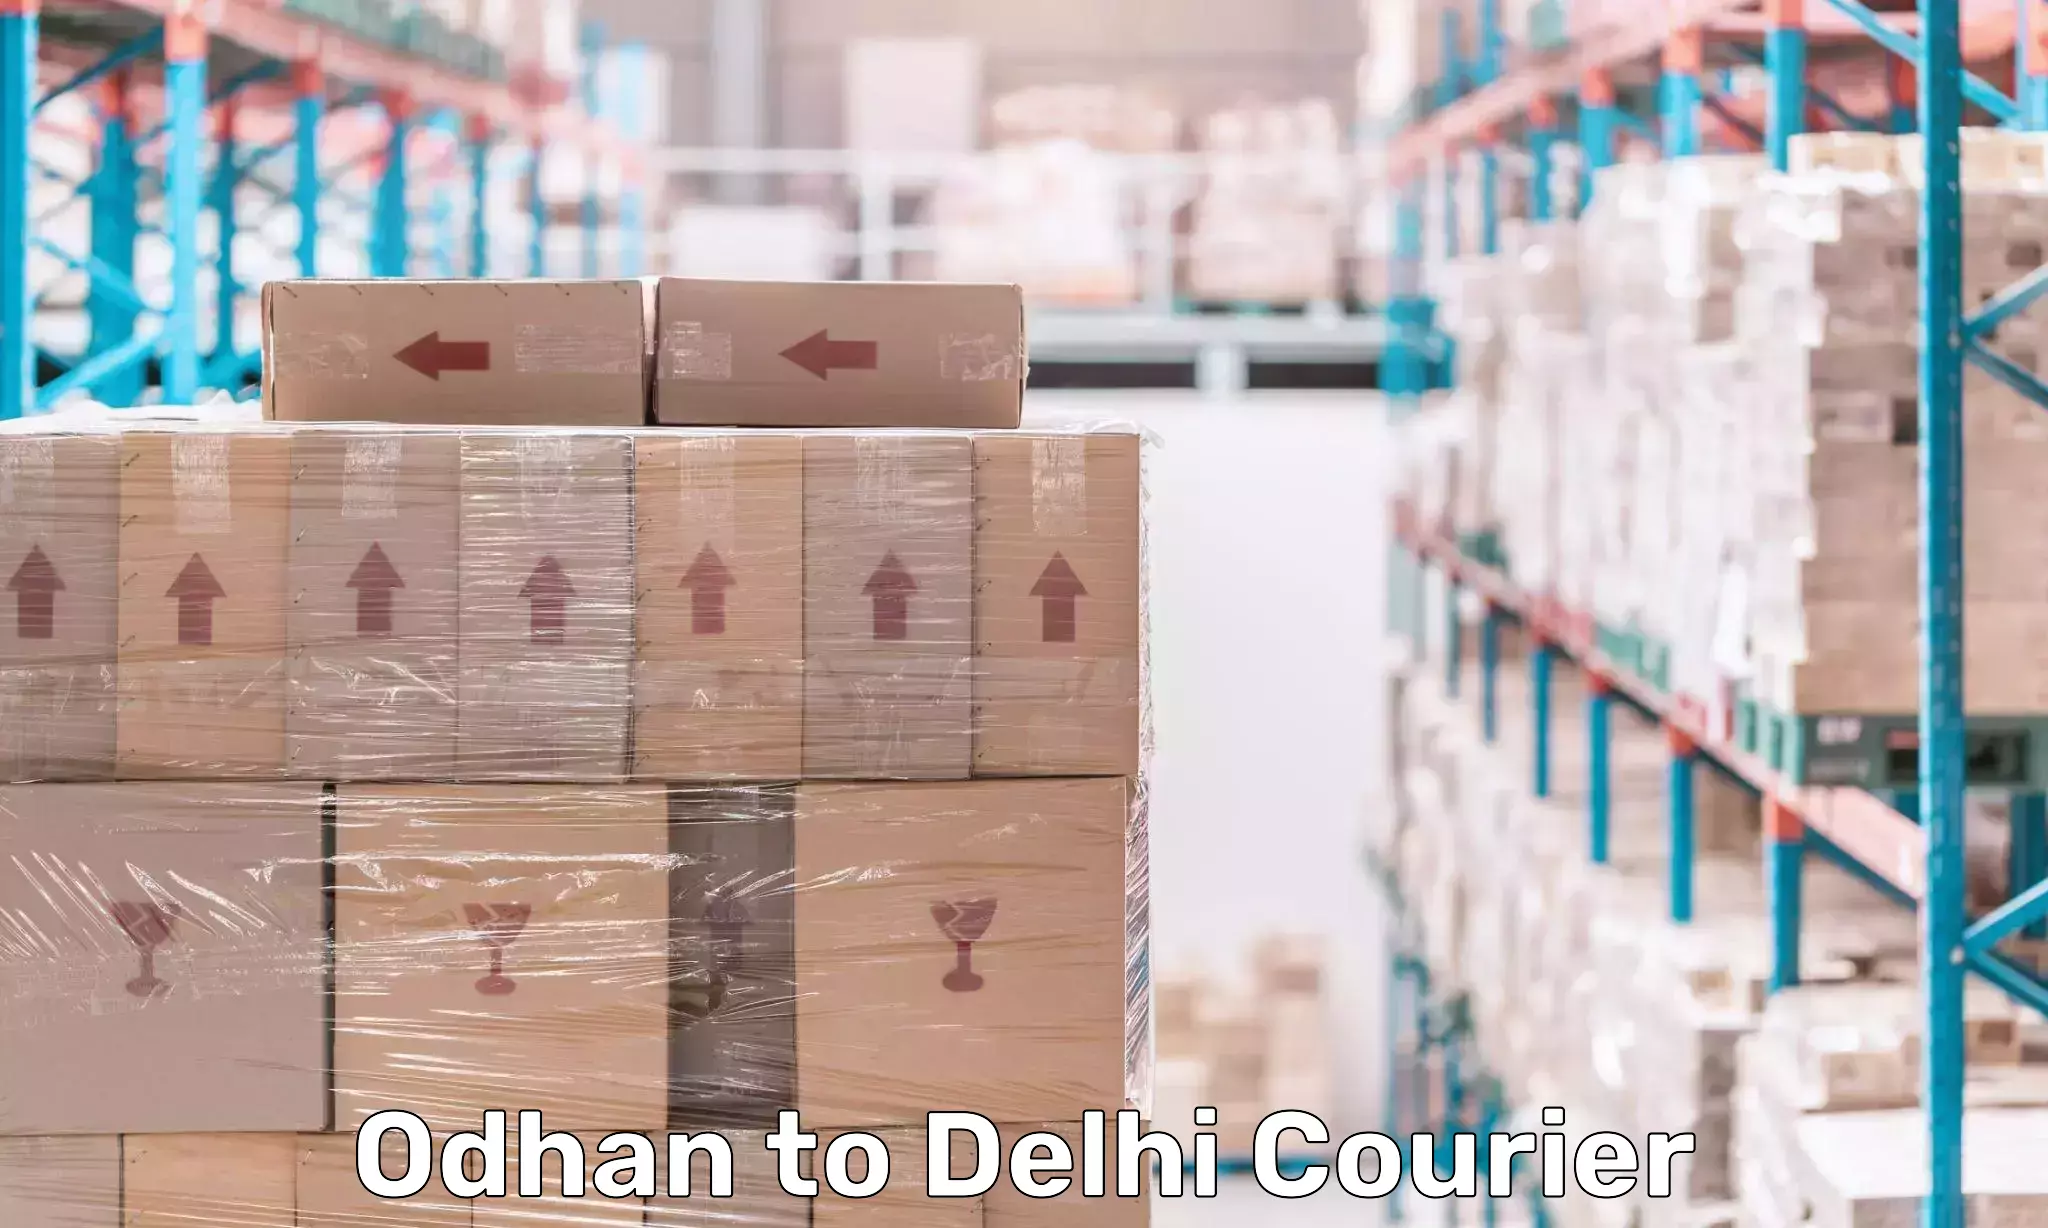 Speedy delivery service Odhan to Lodhi Road